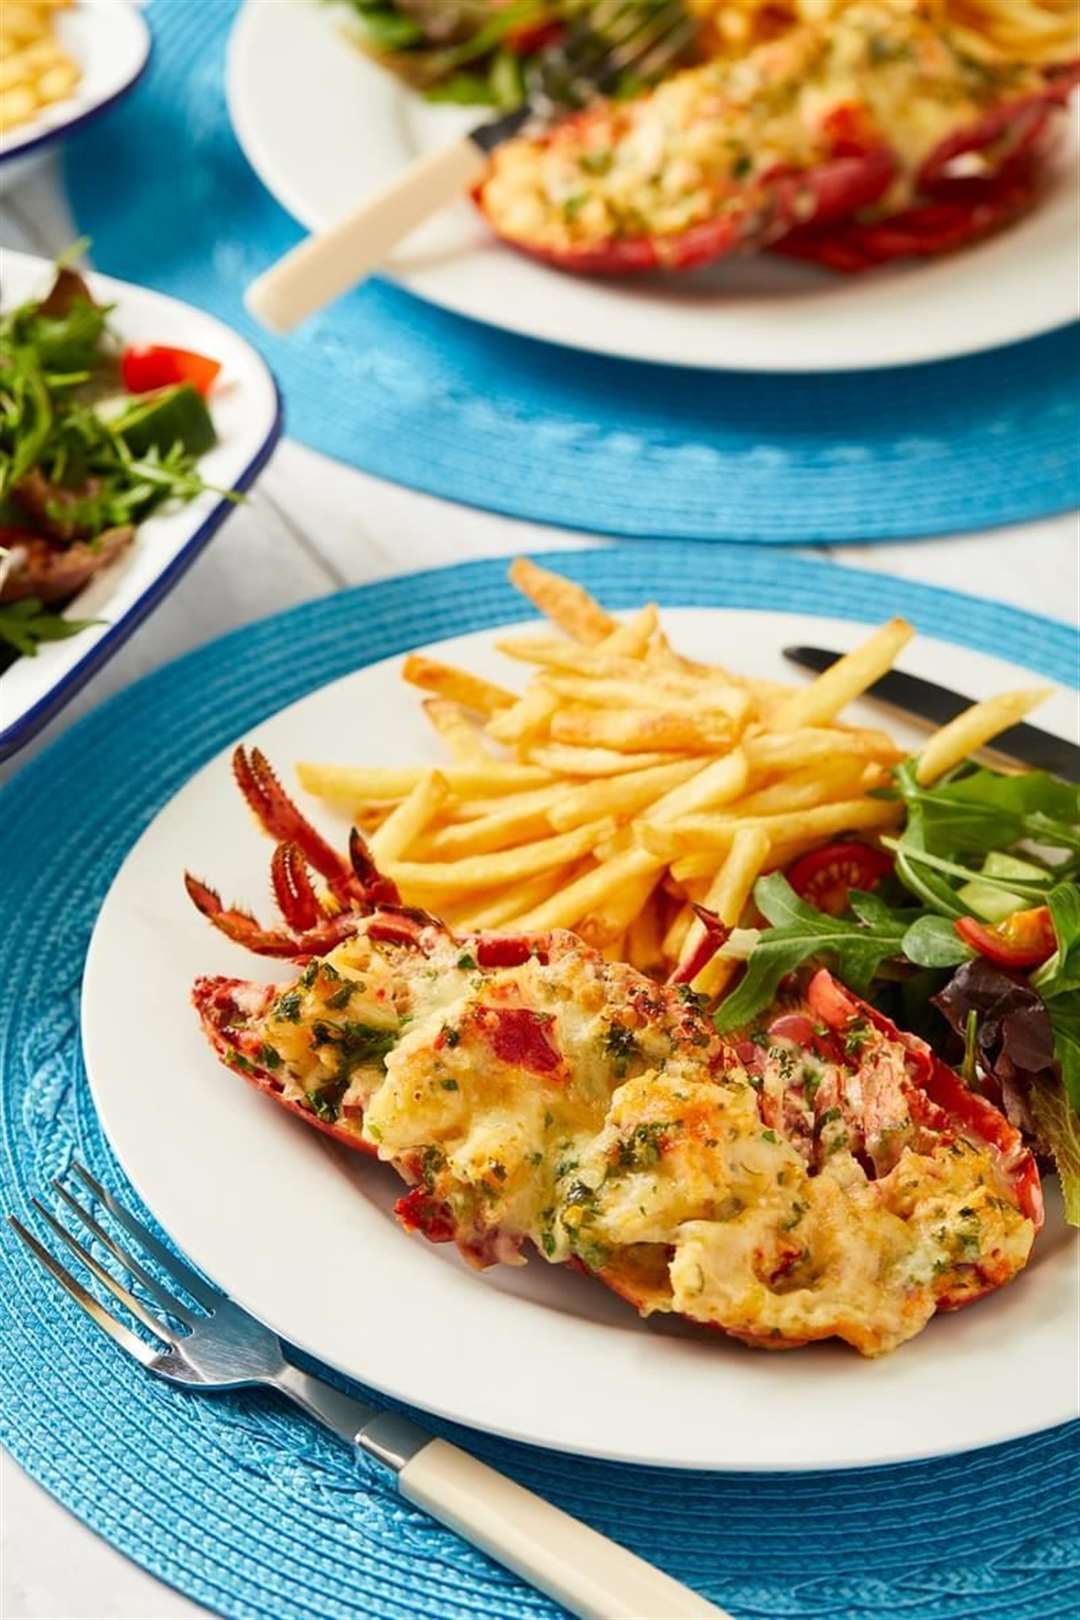 Dishes such as Lobster thermidore will be discussed and demonstrated.